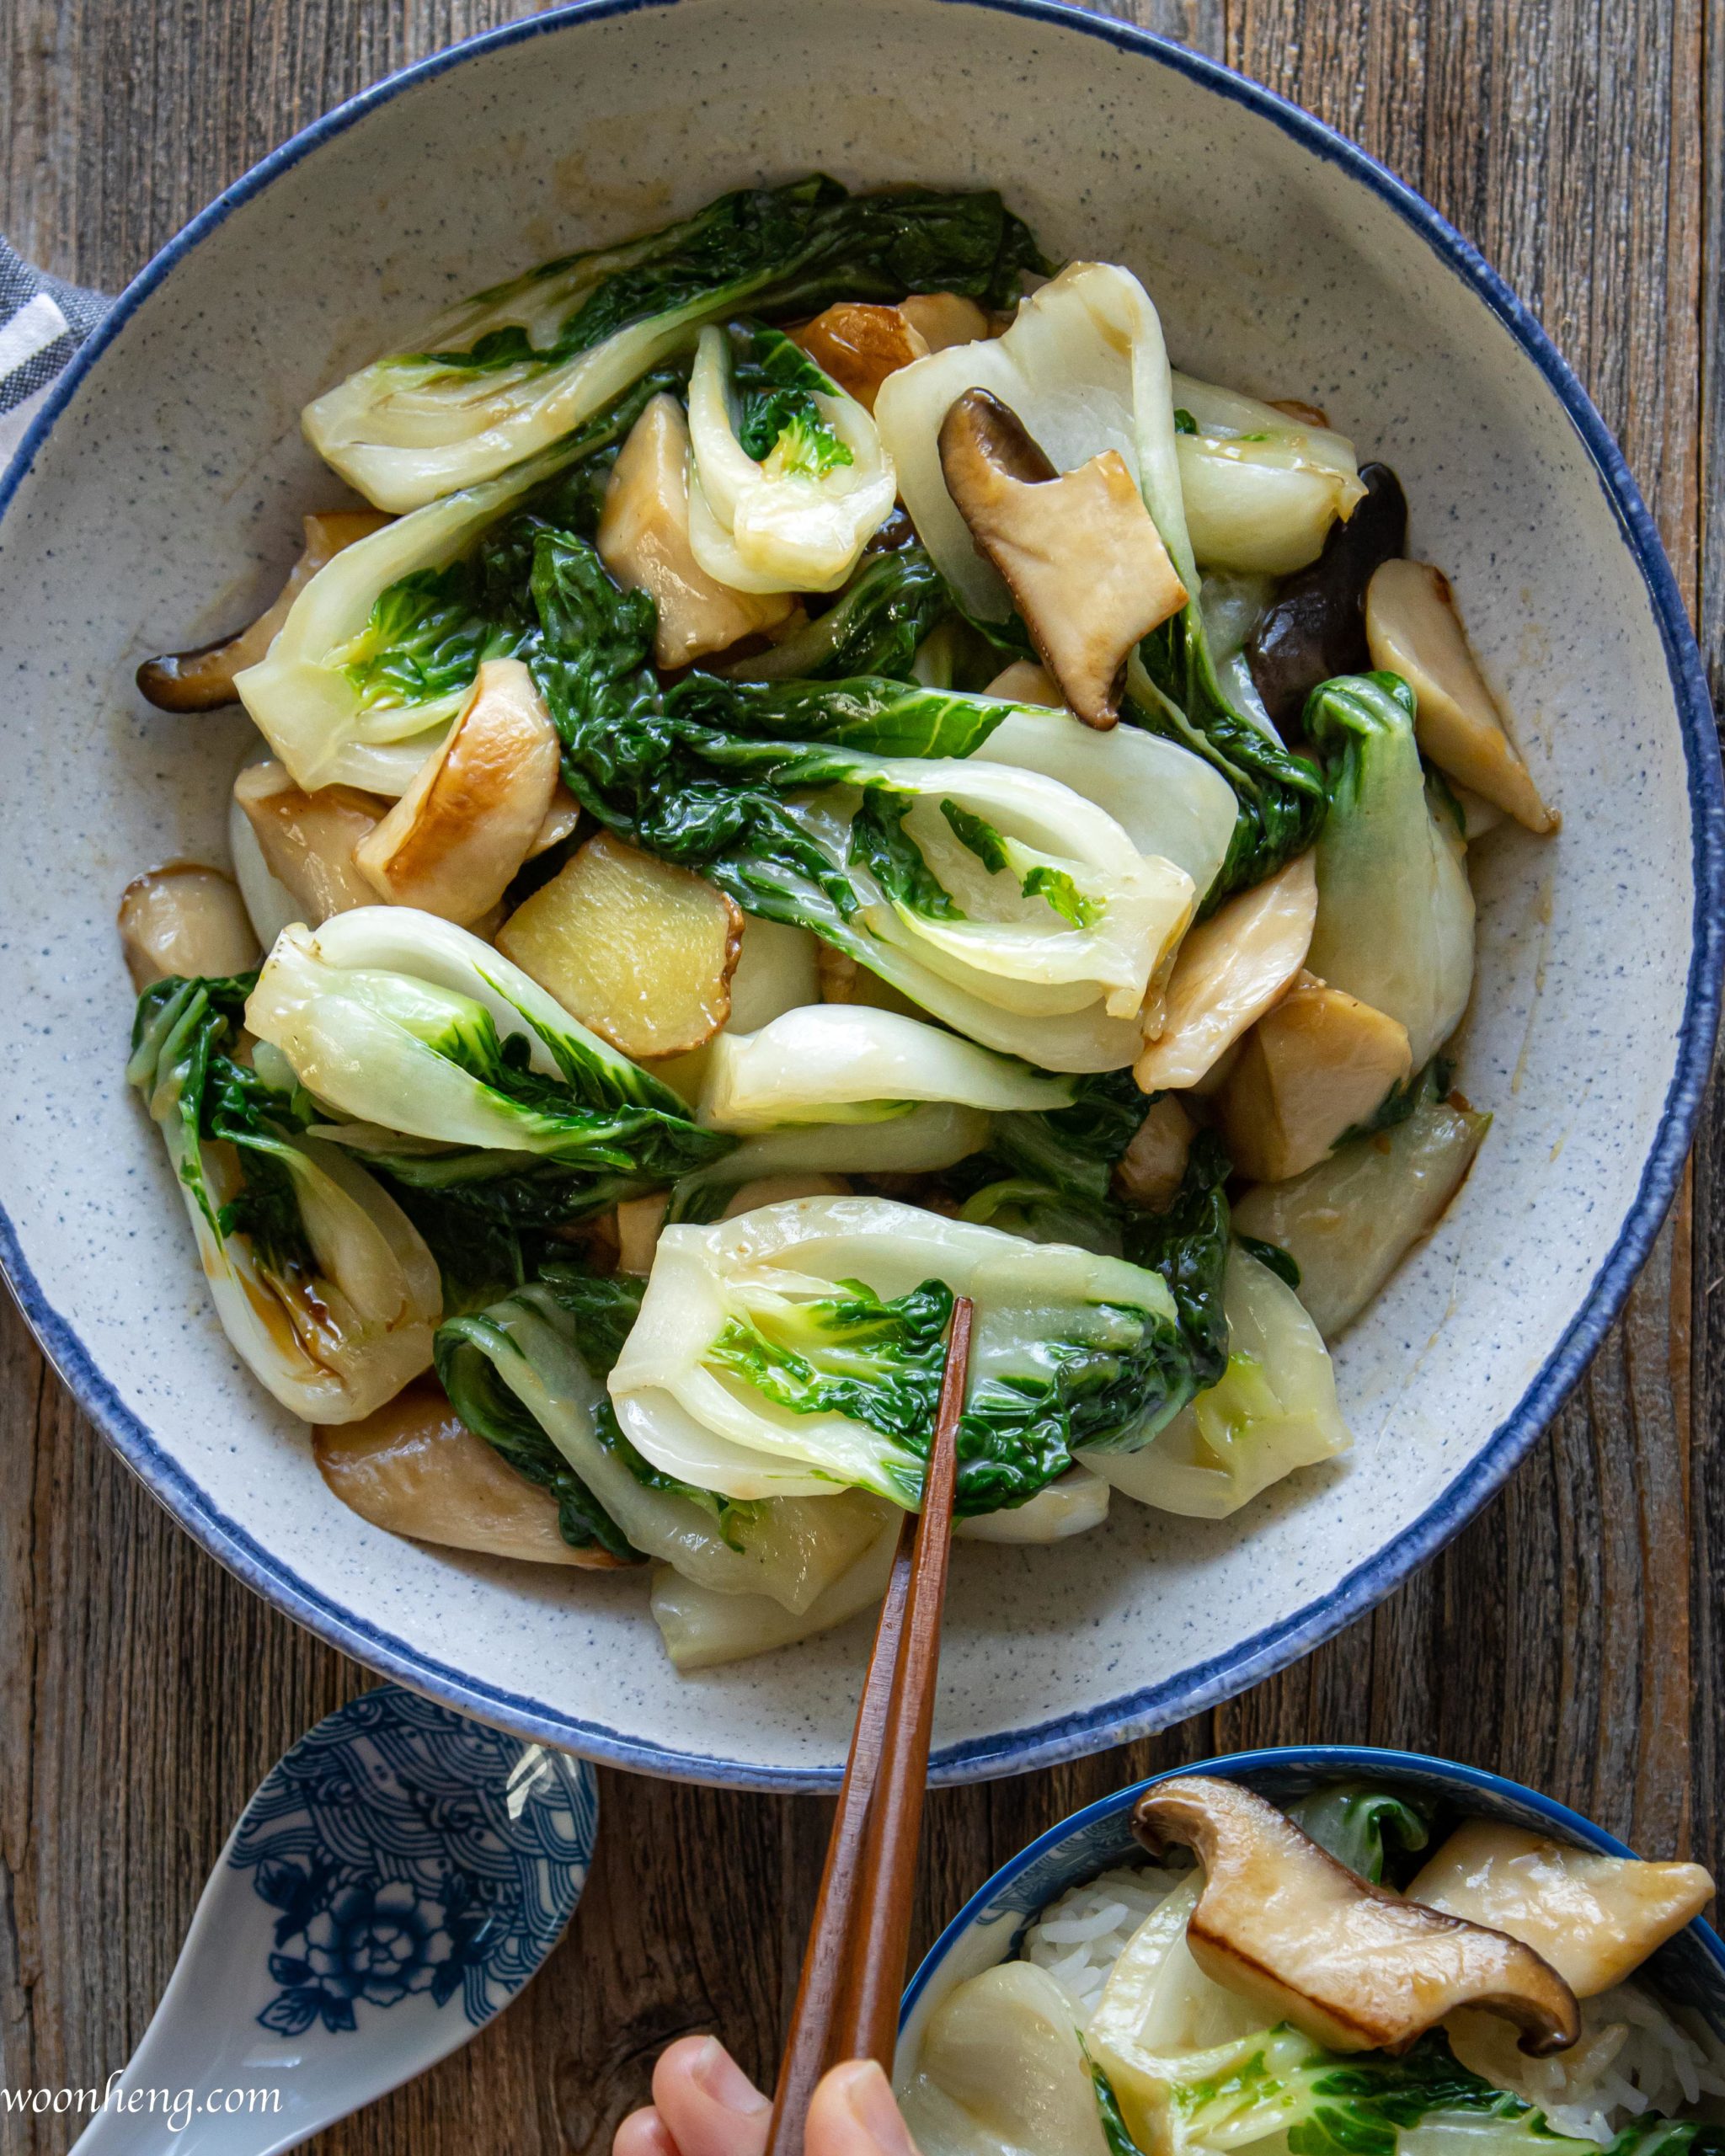 The Easy Bok Choy Stir Fry You Need | 炒奶油白菜 - WoonHeng